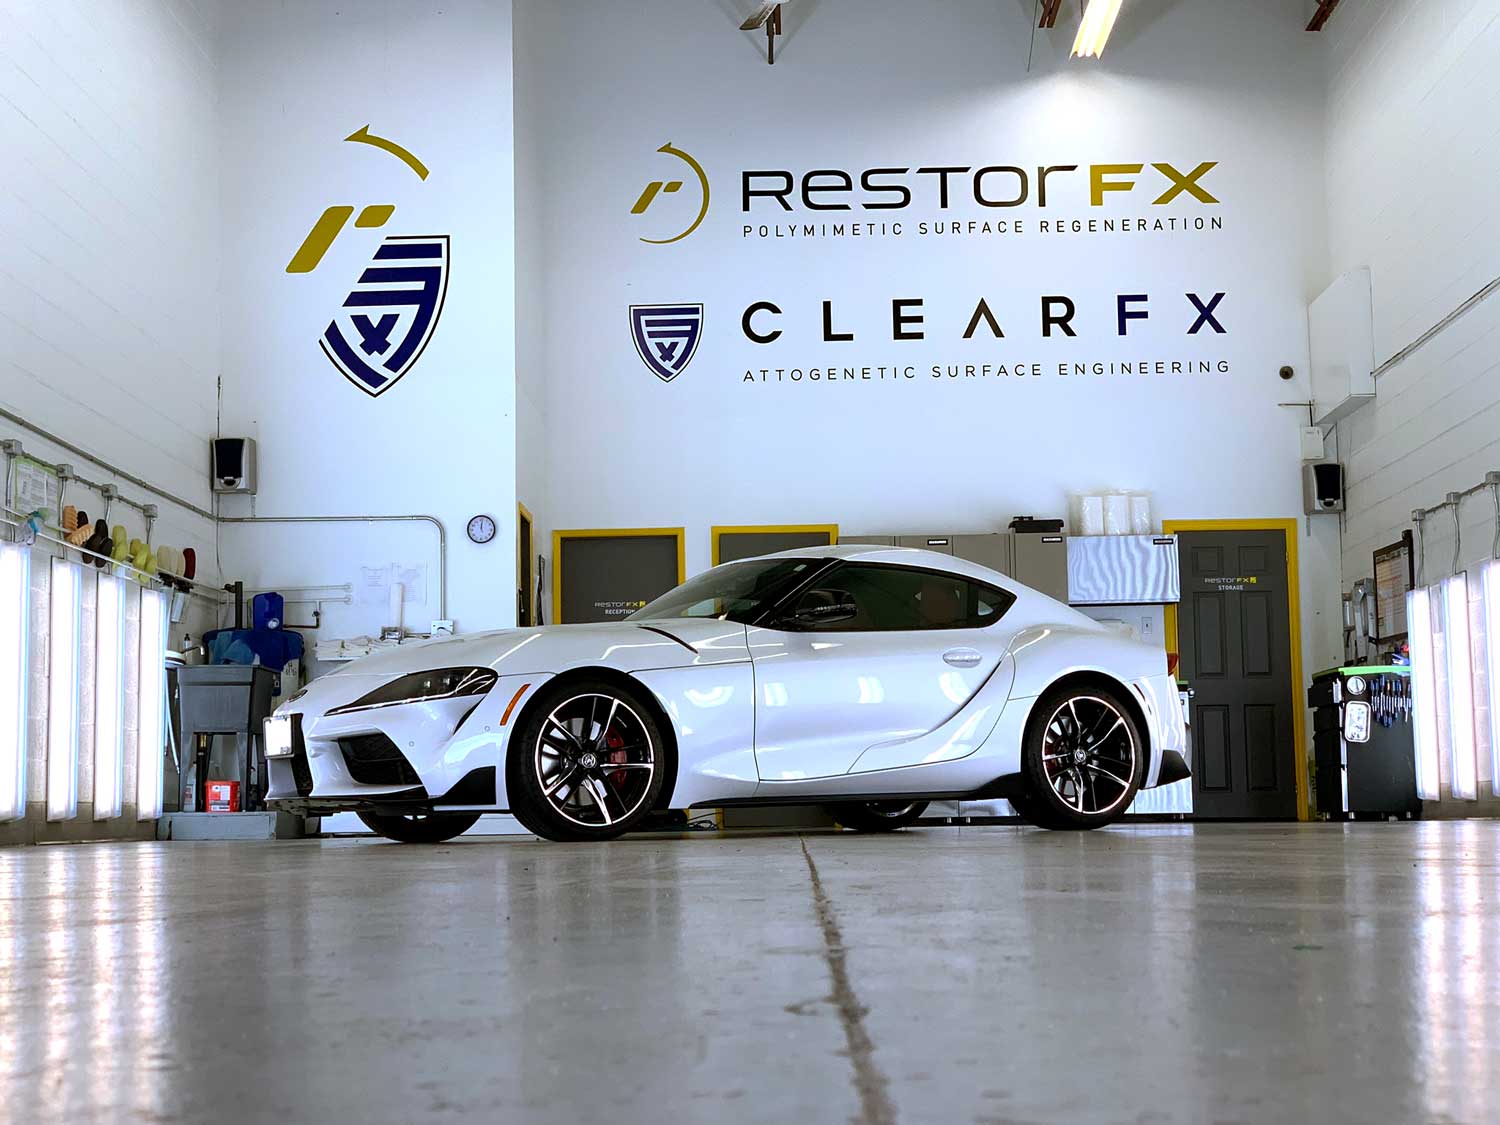 RestorFX GTA shop area with a white sports car inside the brightly lit facility with tall ceilings